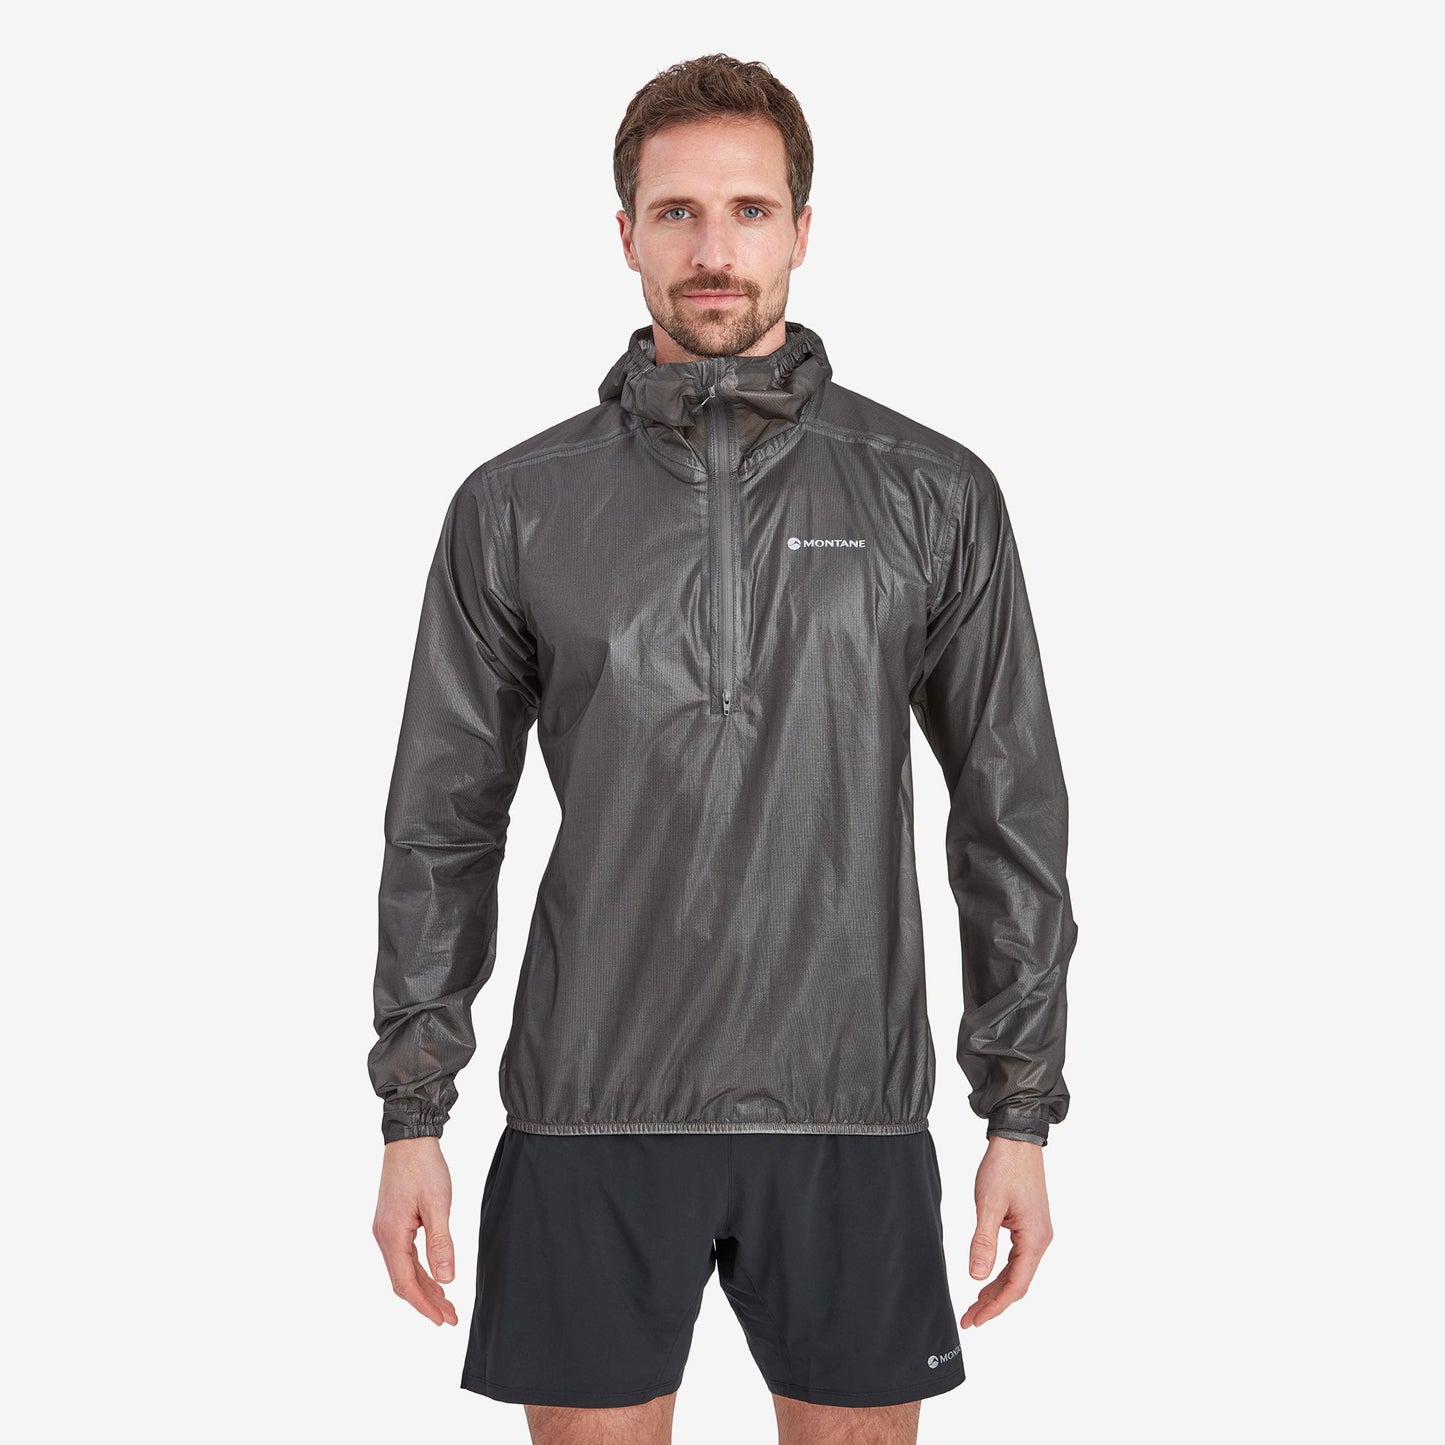 Montane Unisex Minimus Nano Pull-On An extremely lightweight waterproof jacket for running